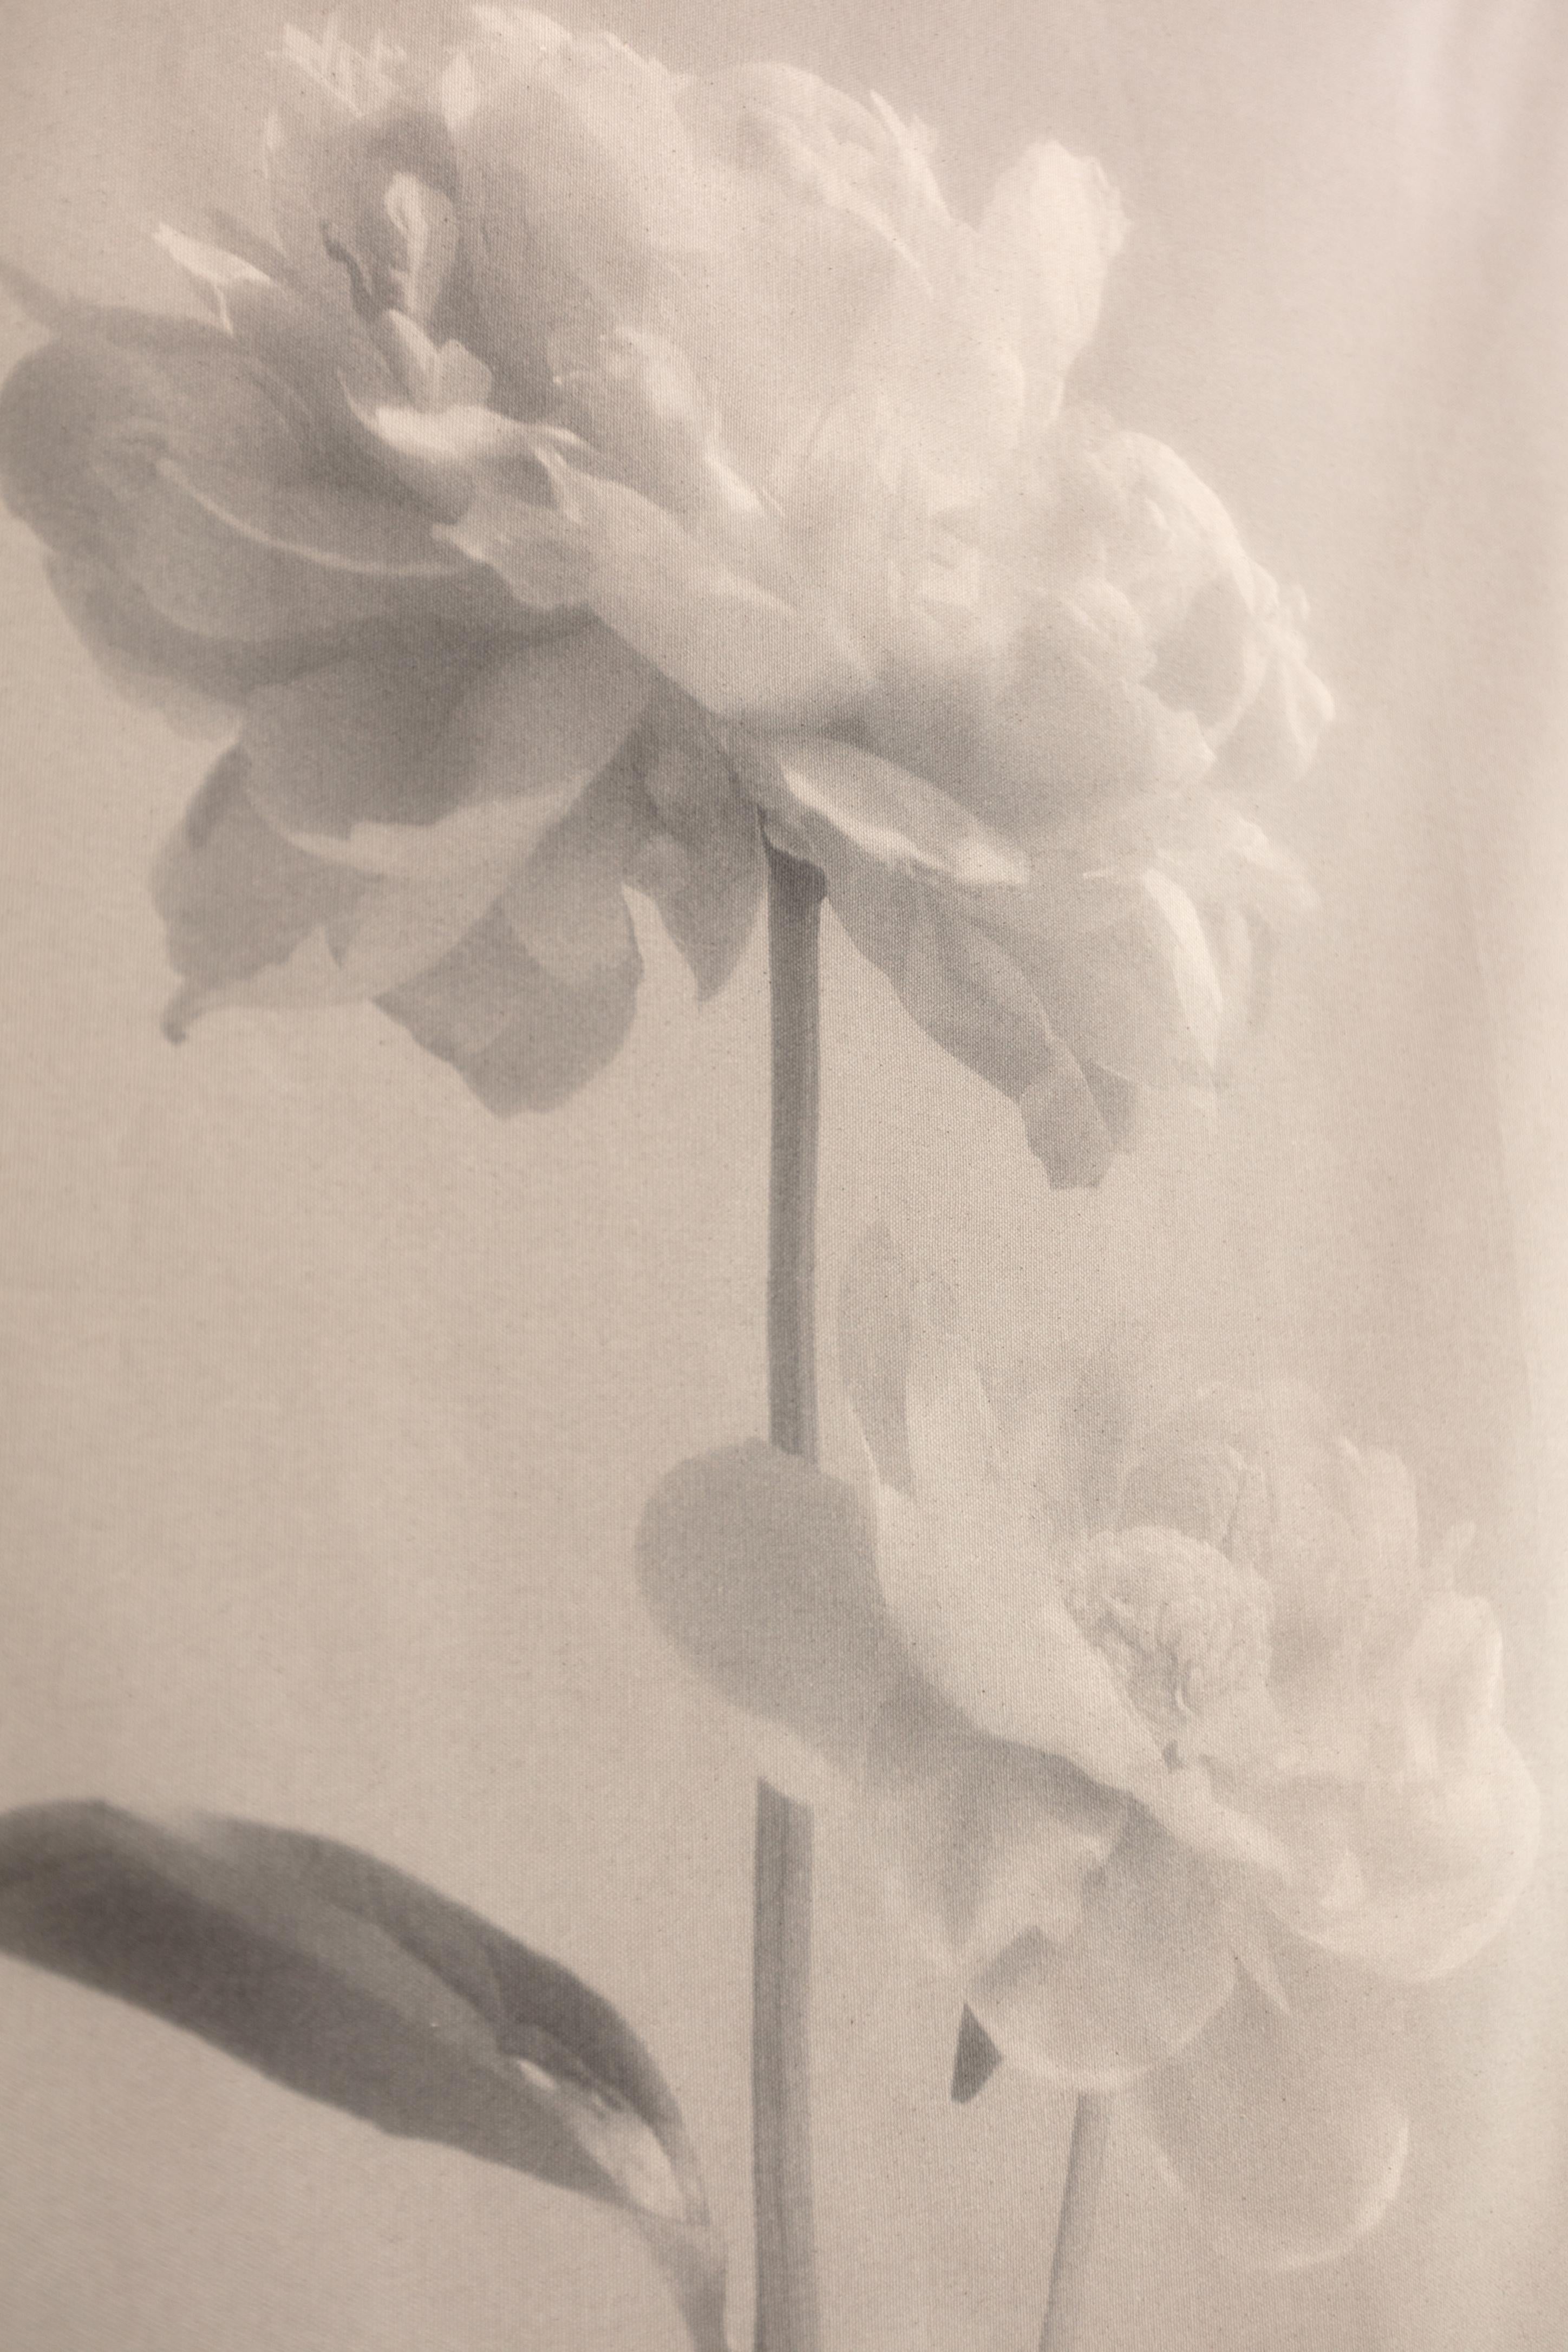 'Peony no.2' cotton canvas scroll, floral photography, Limited edition 2 of 5 - Photograph by Ugne Pouwell